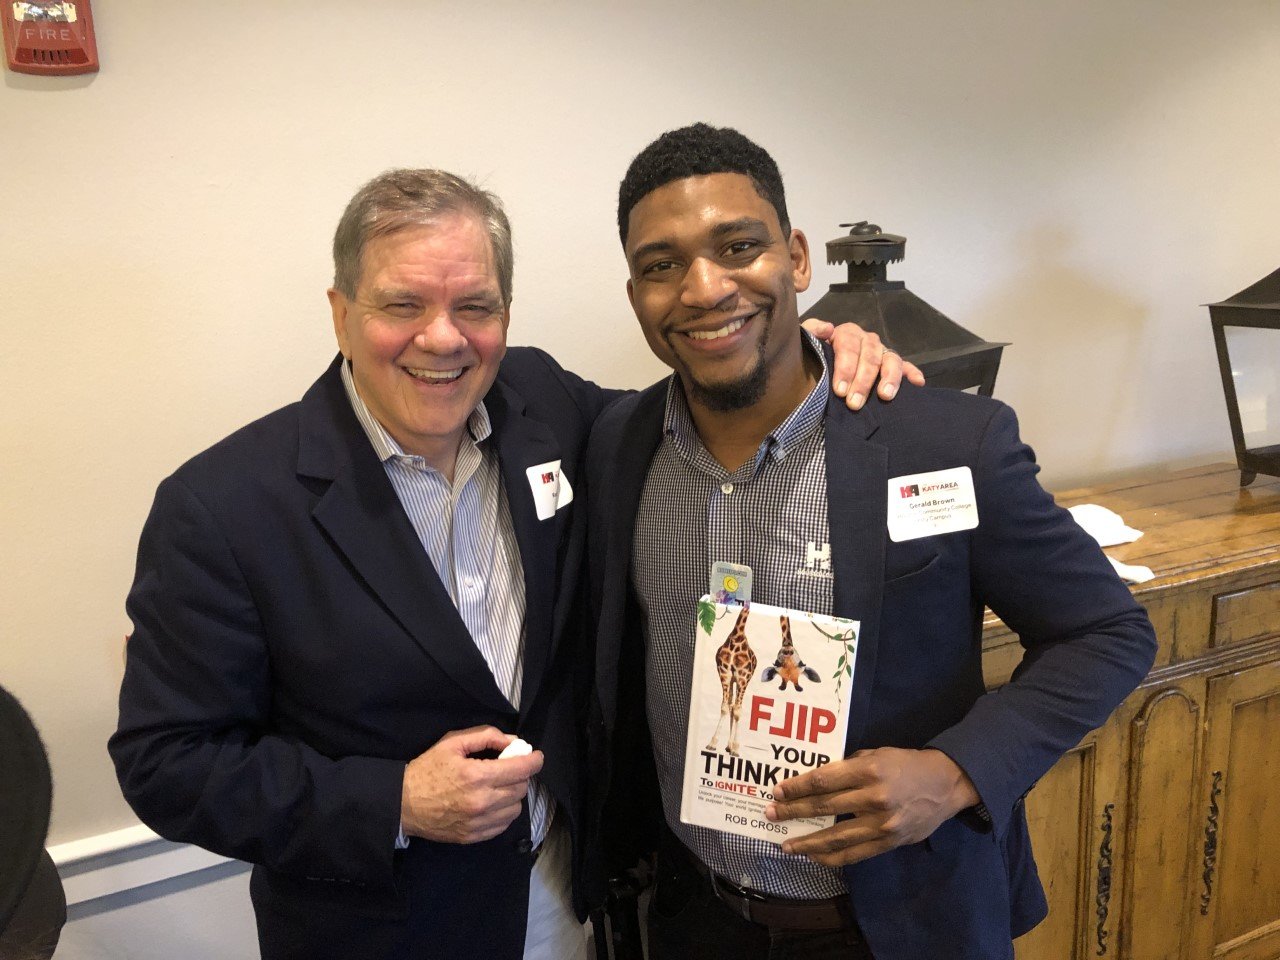 Rob Cross, left, was the featured speaker at the Dec. 8 Katy Area Chamber of Commerce luncheon at Brookwood Community, 1752 FM 1489 in Brookshire. Cross is also an author and sold copies of his book, Flip Your Thinking. Here Cross poses with Gerald Brown of Houston Community College.